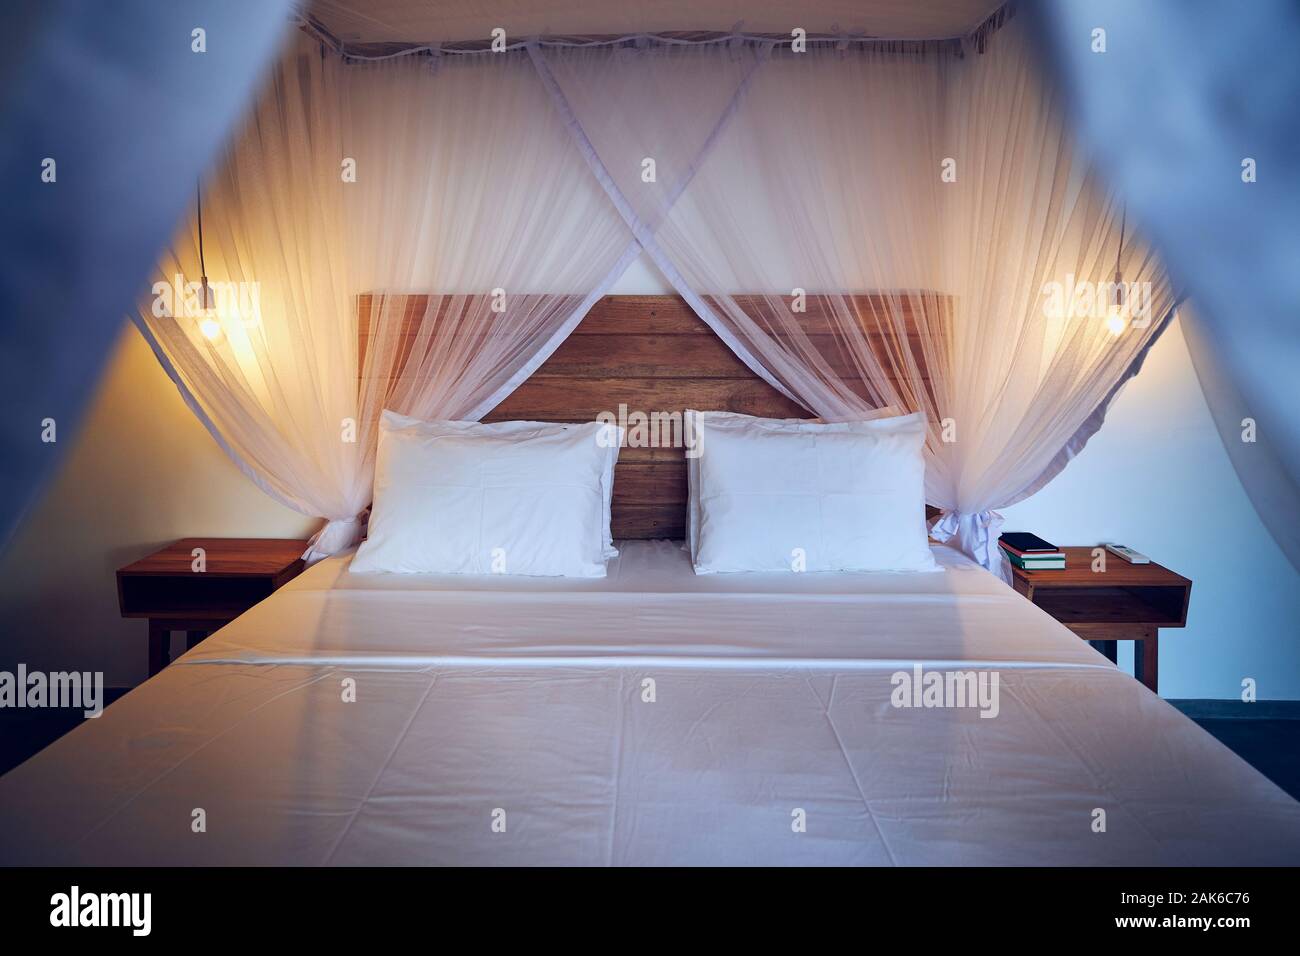 Luxury accommodation in tropical destination. Double bed with mosquito net  in modern bungalow Stock Photo - Alamy